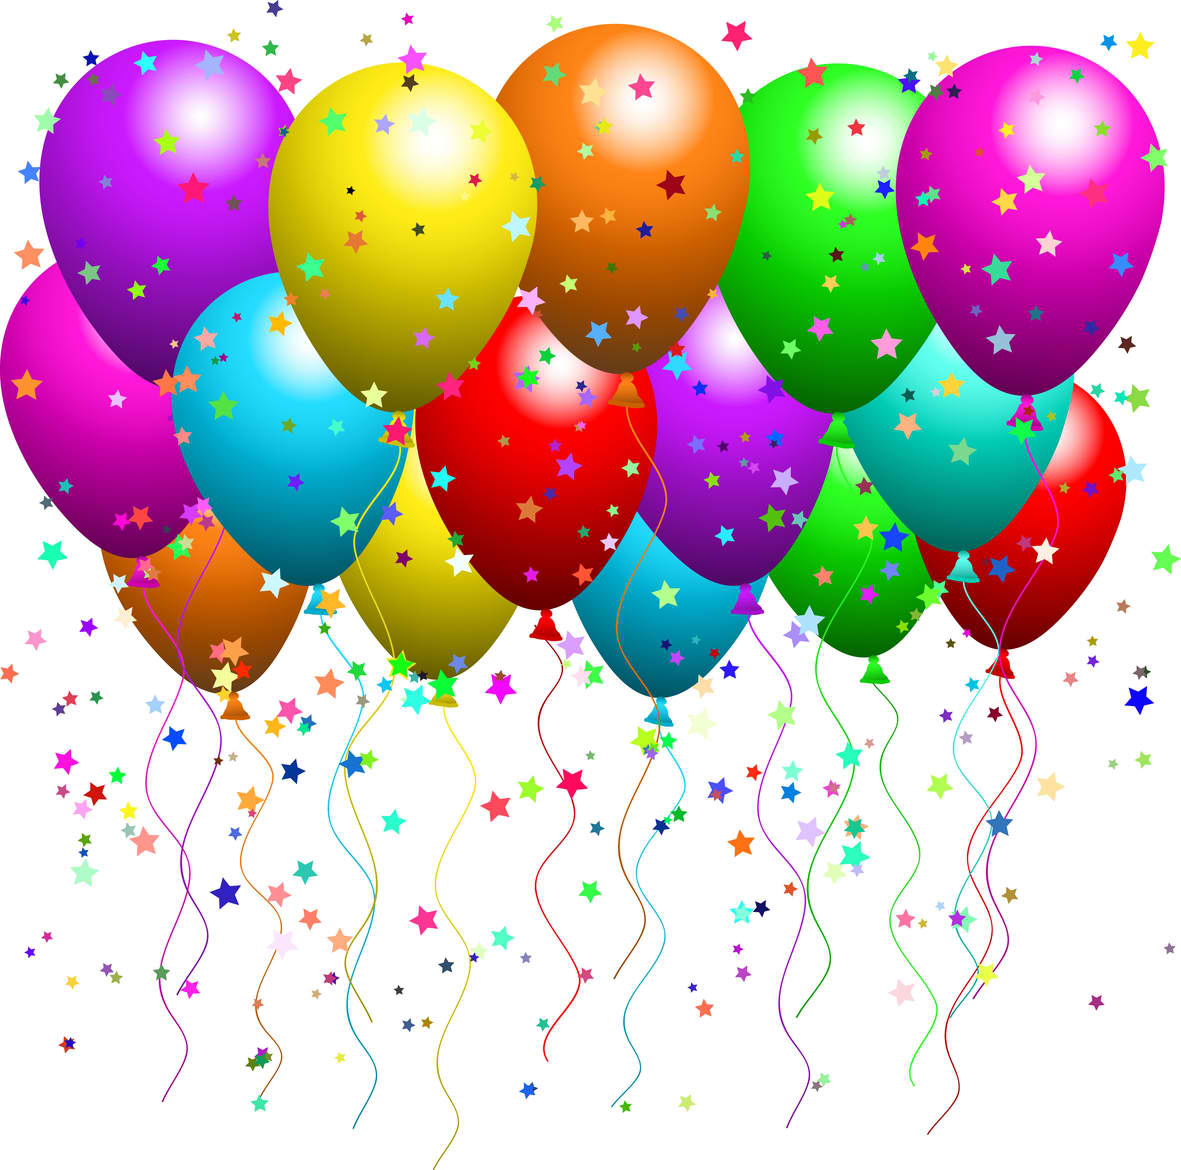 Happy Birthday Clipart Archives - Page 47 of 49 - ClipartBagus